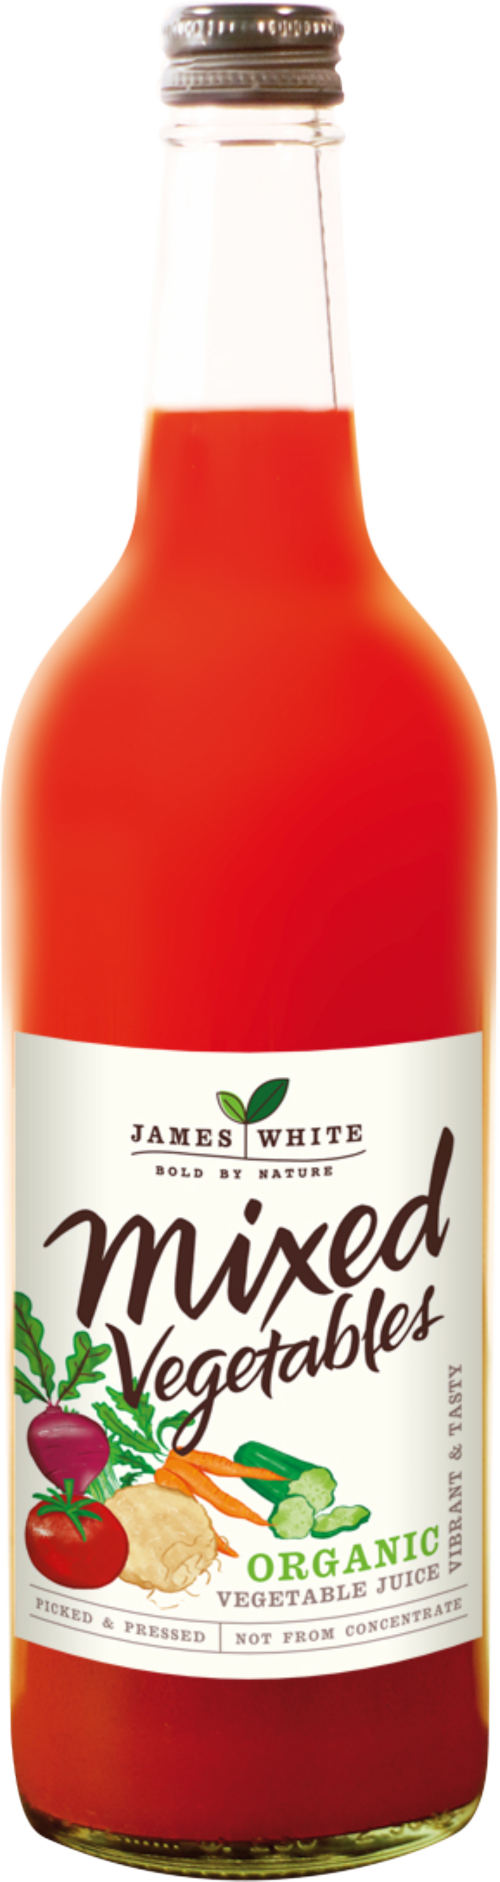 JAMES WHITE Organic Mixed Vegetable Juice 75cl